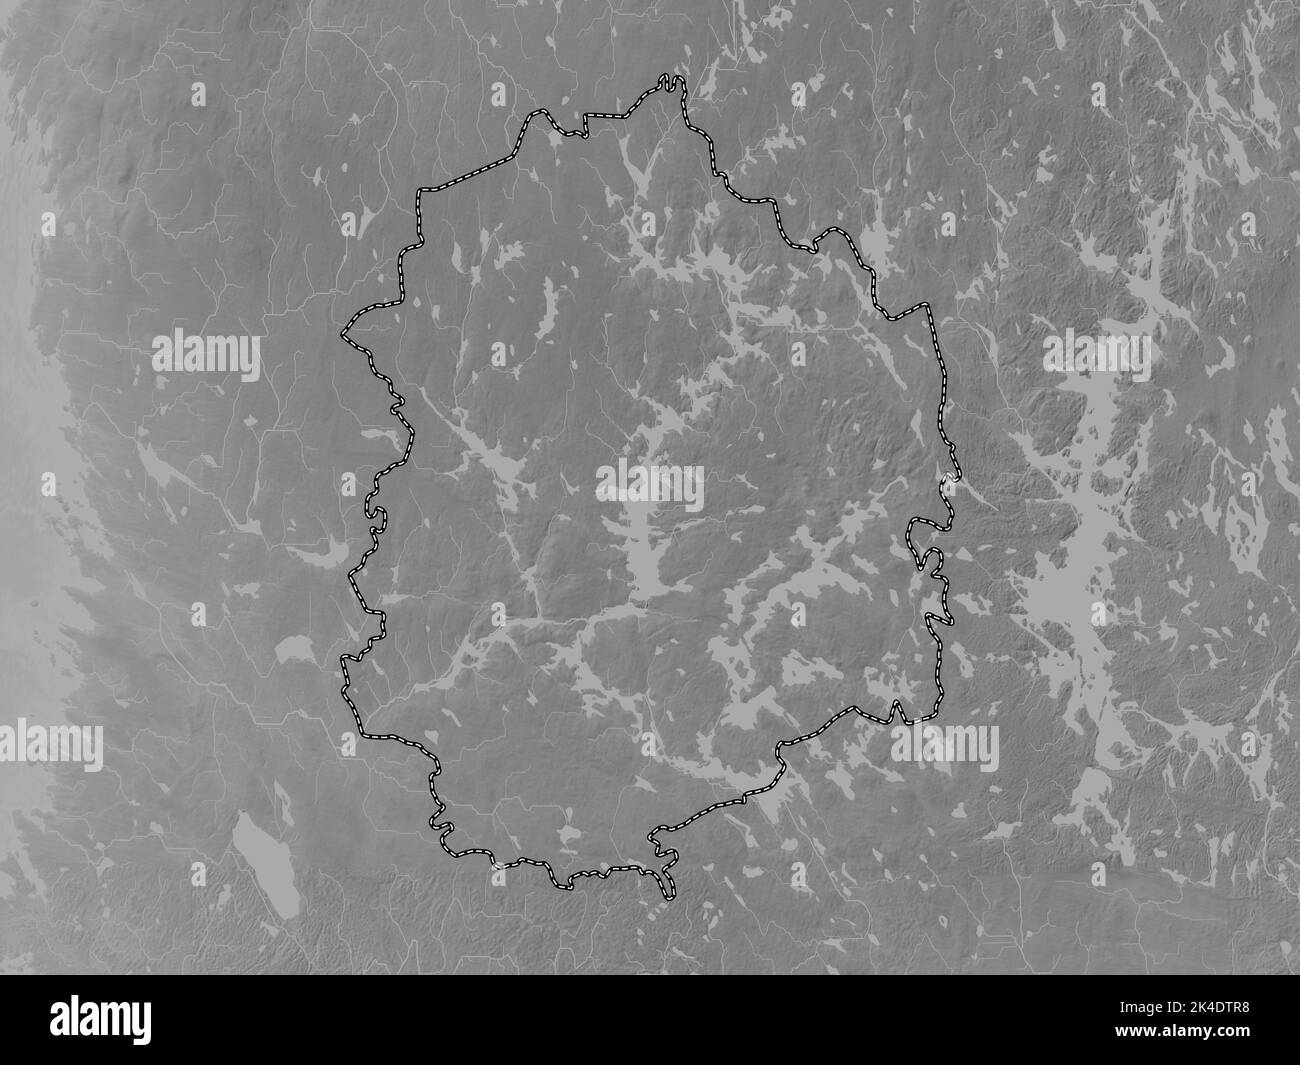 Pirkanmaa, region of Finland. Grayscale elevation map with lakes and rivers Stock Photo